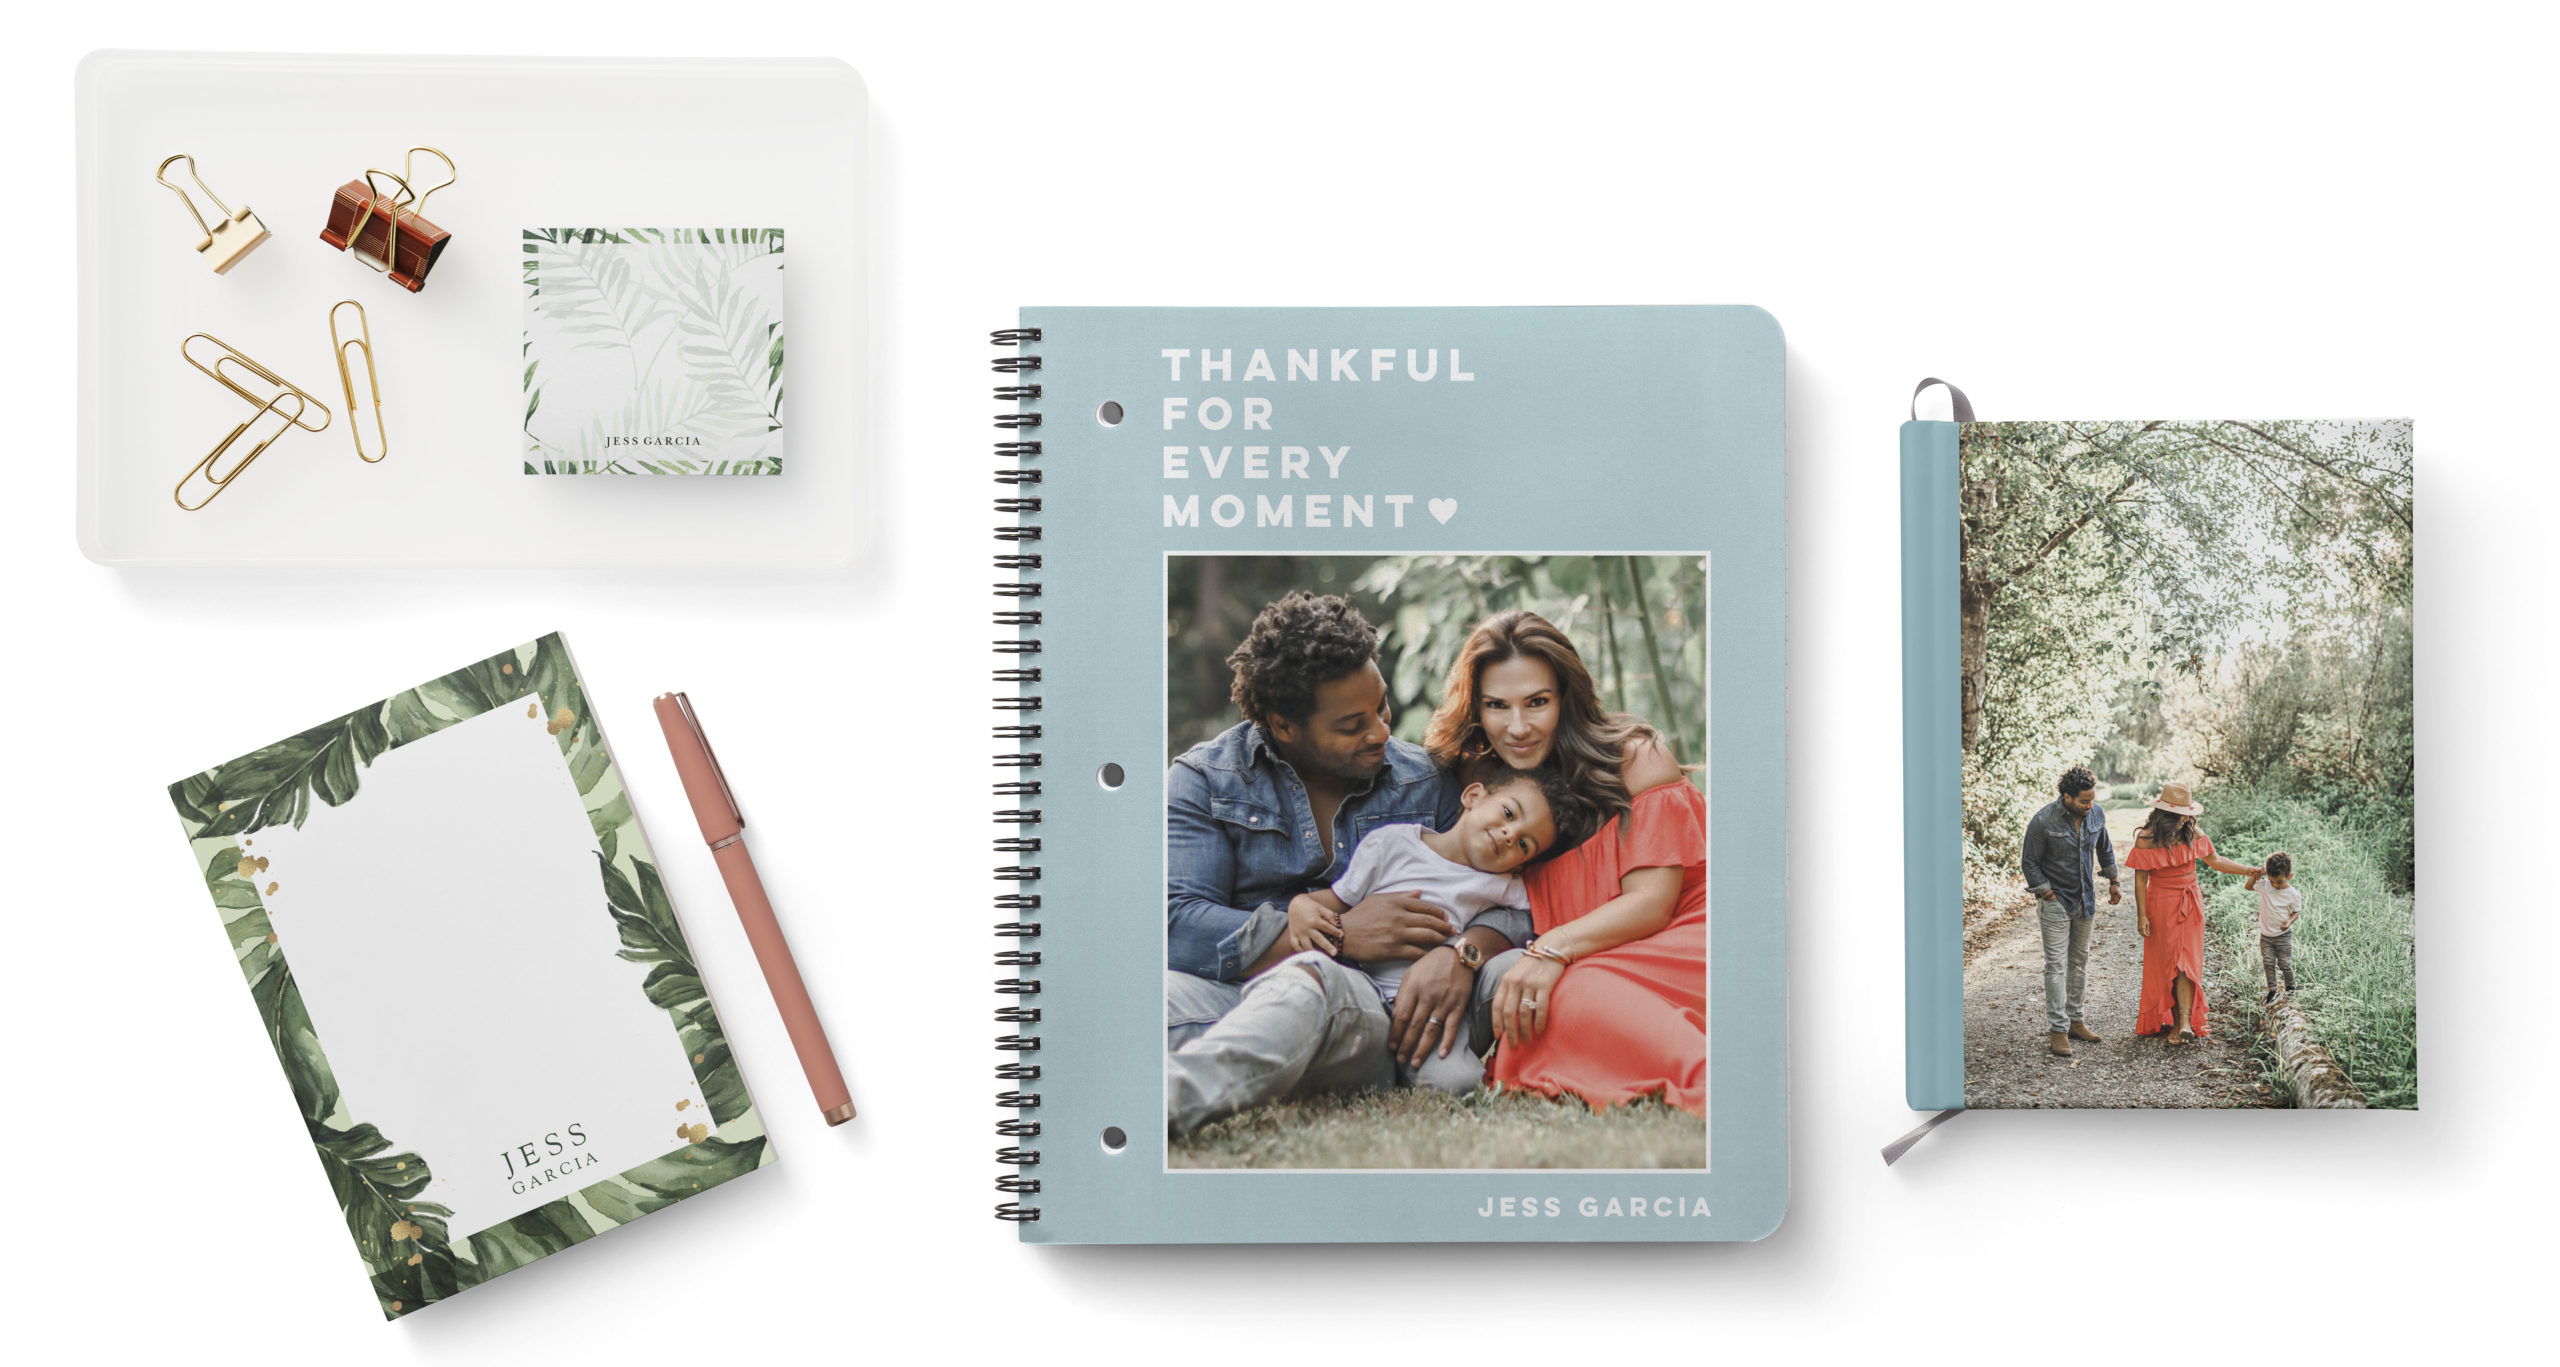 Thankful for every moment personalized notebook, notepad with green border, and journal